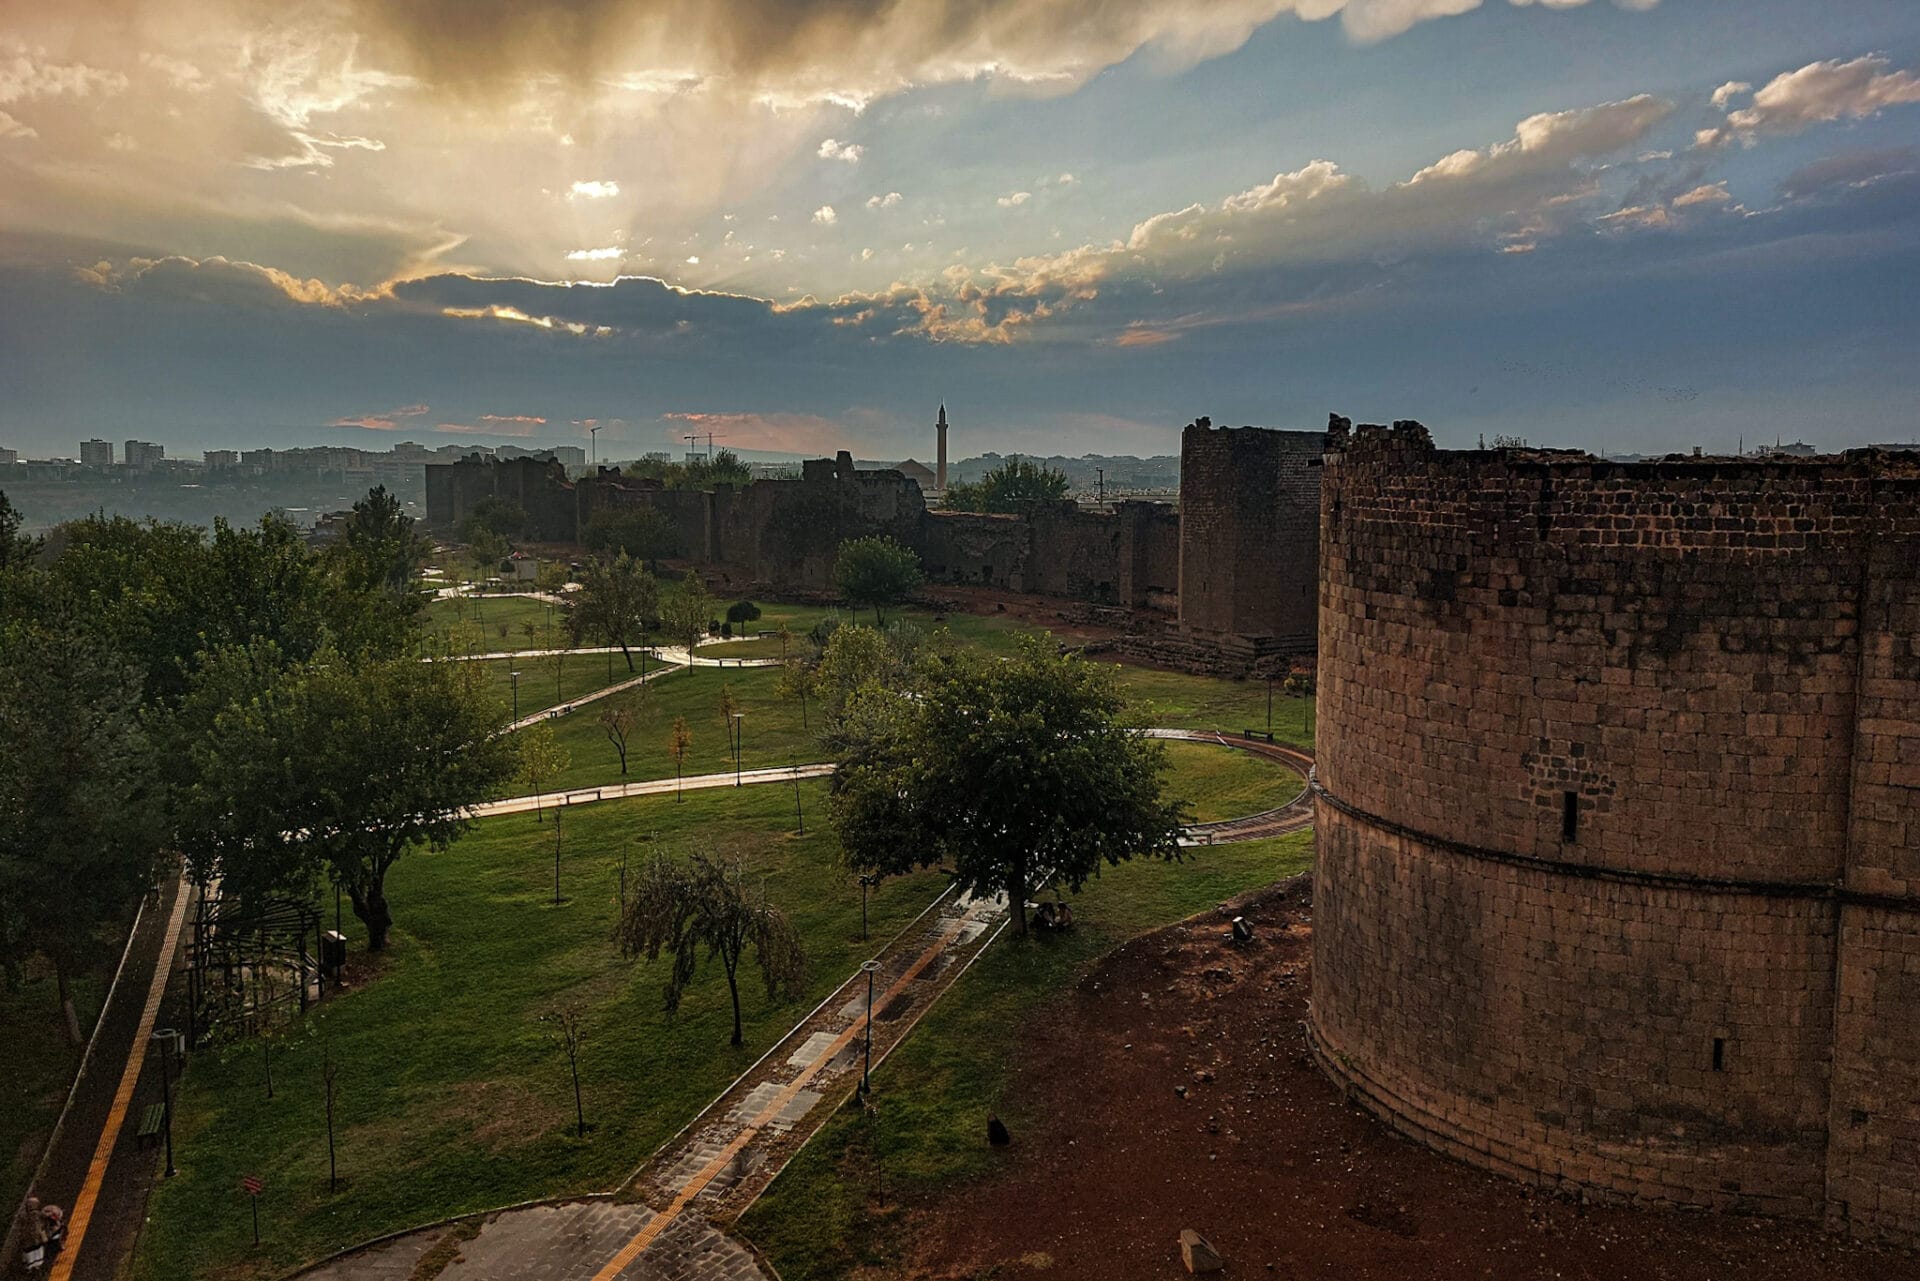 the sun breaks through the clouds above the impressive city walls of Diyarbakir